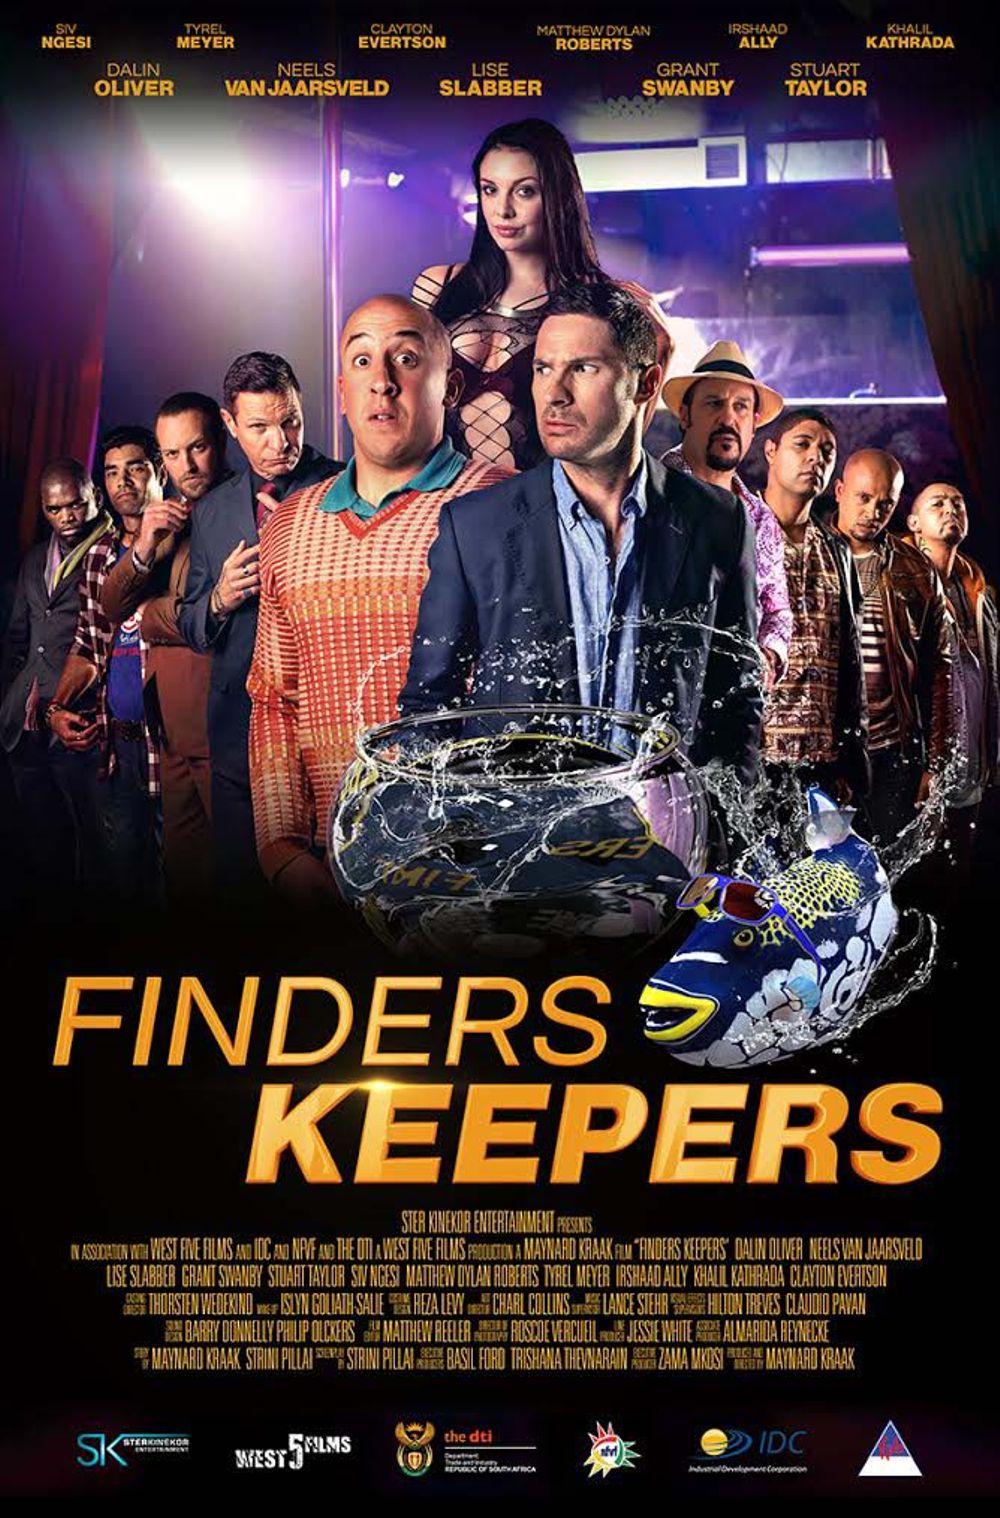 Watch English Trailer Of Finders Keepers